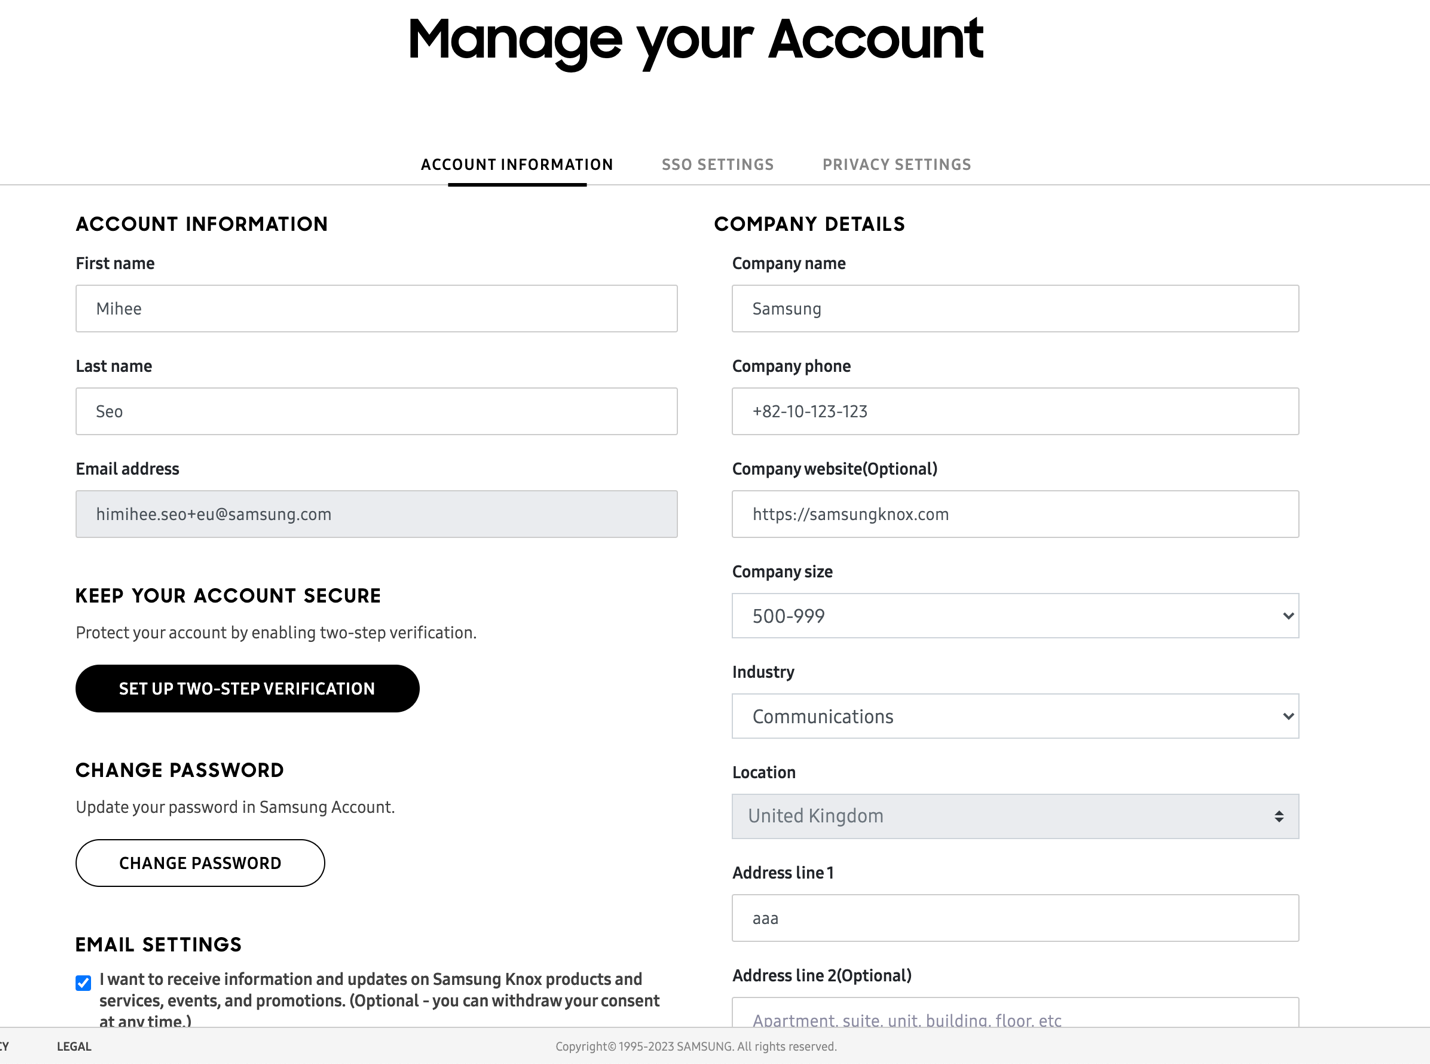 Manage your account page